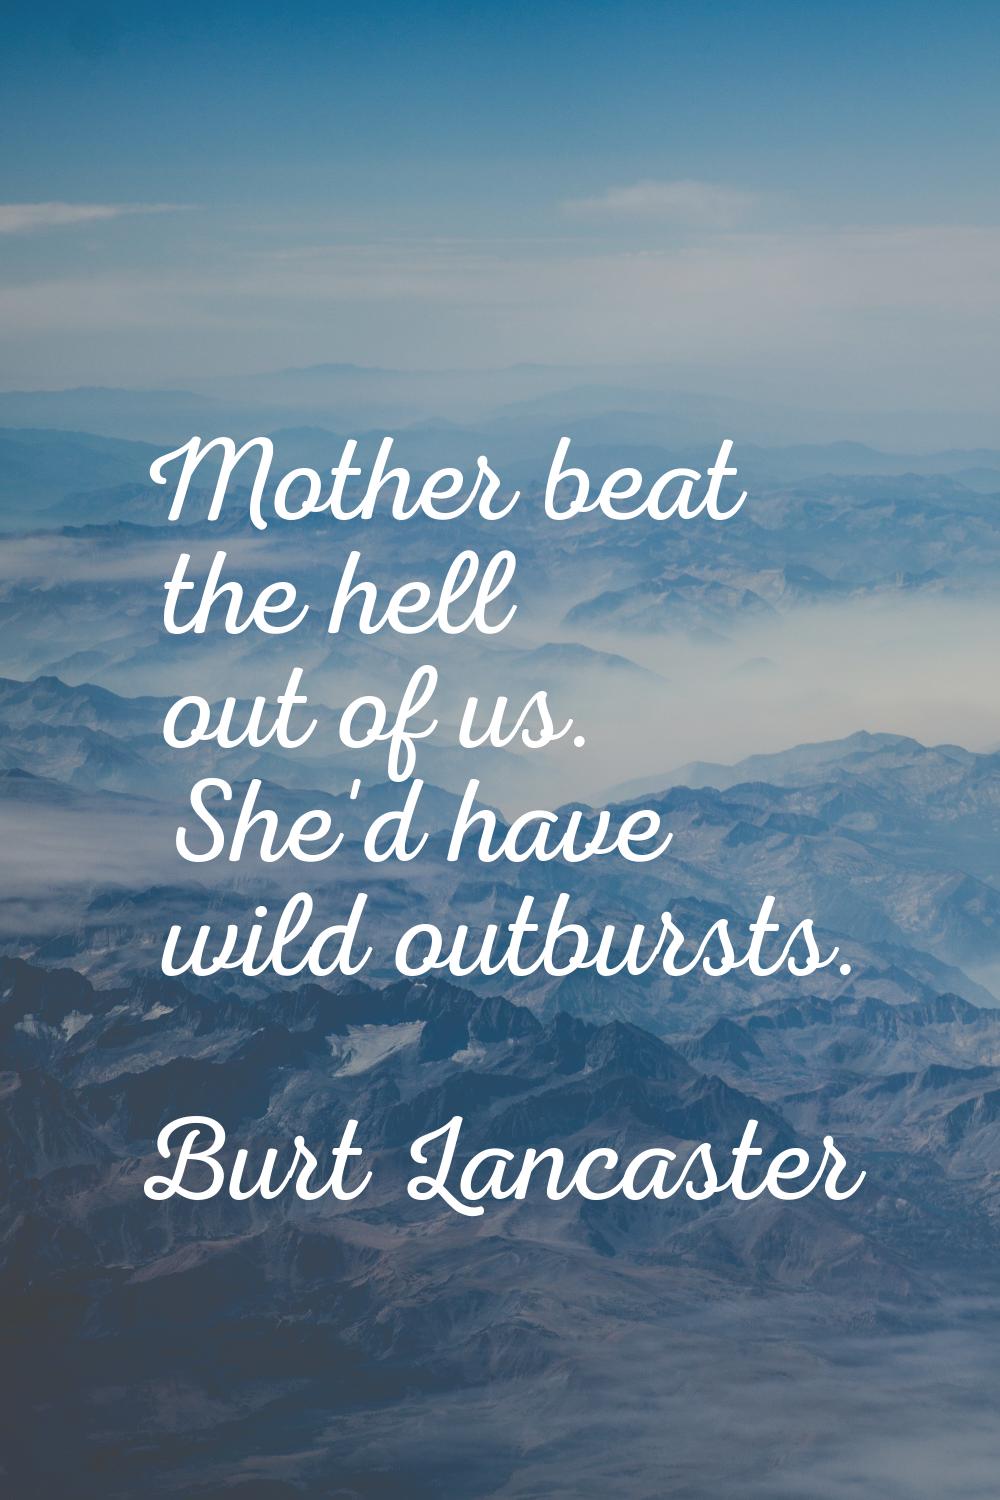 Mother beat the hell out of us. She'd have wild outbursts.